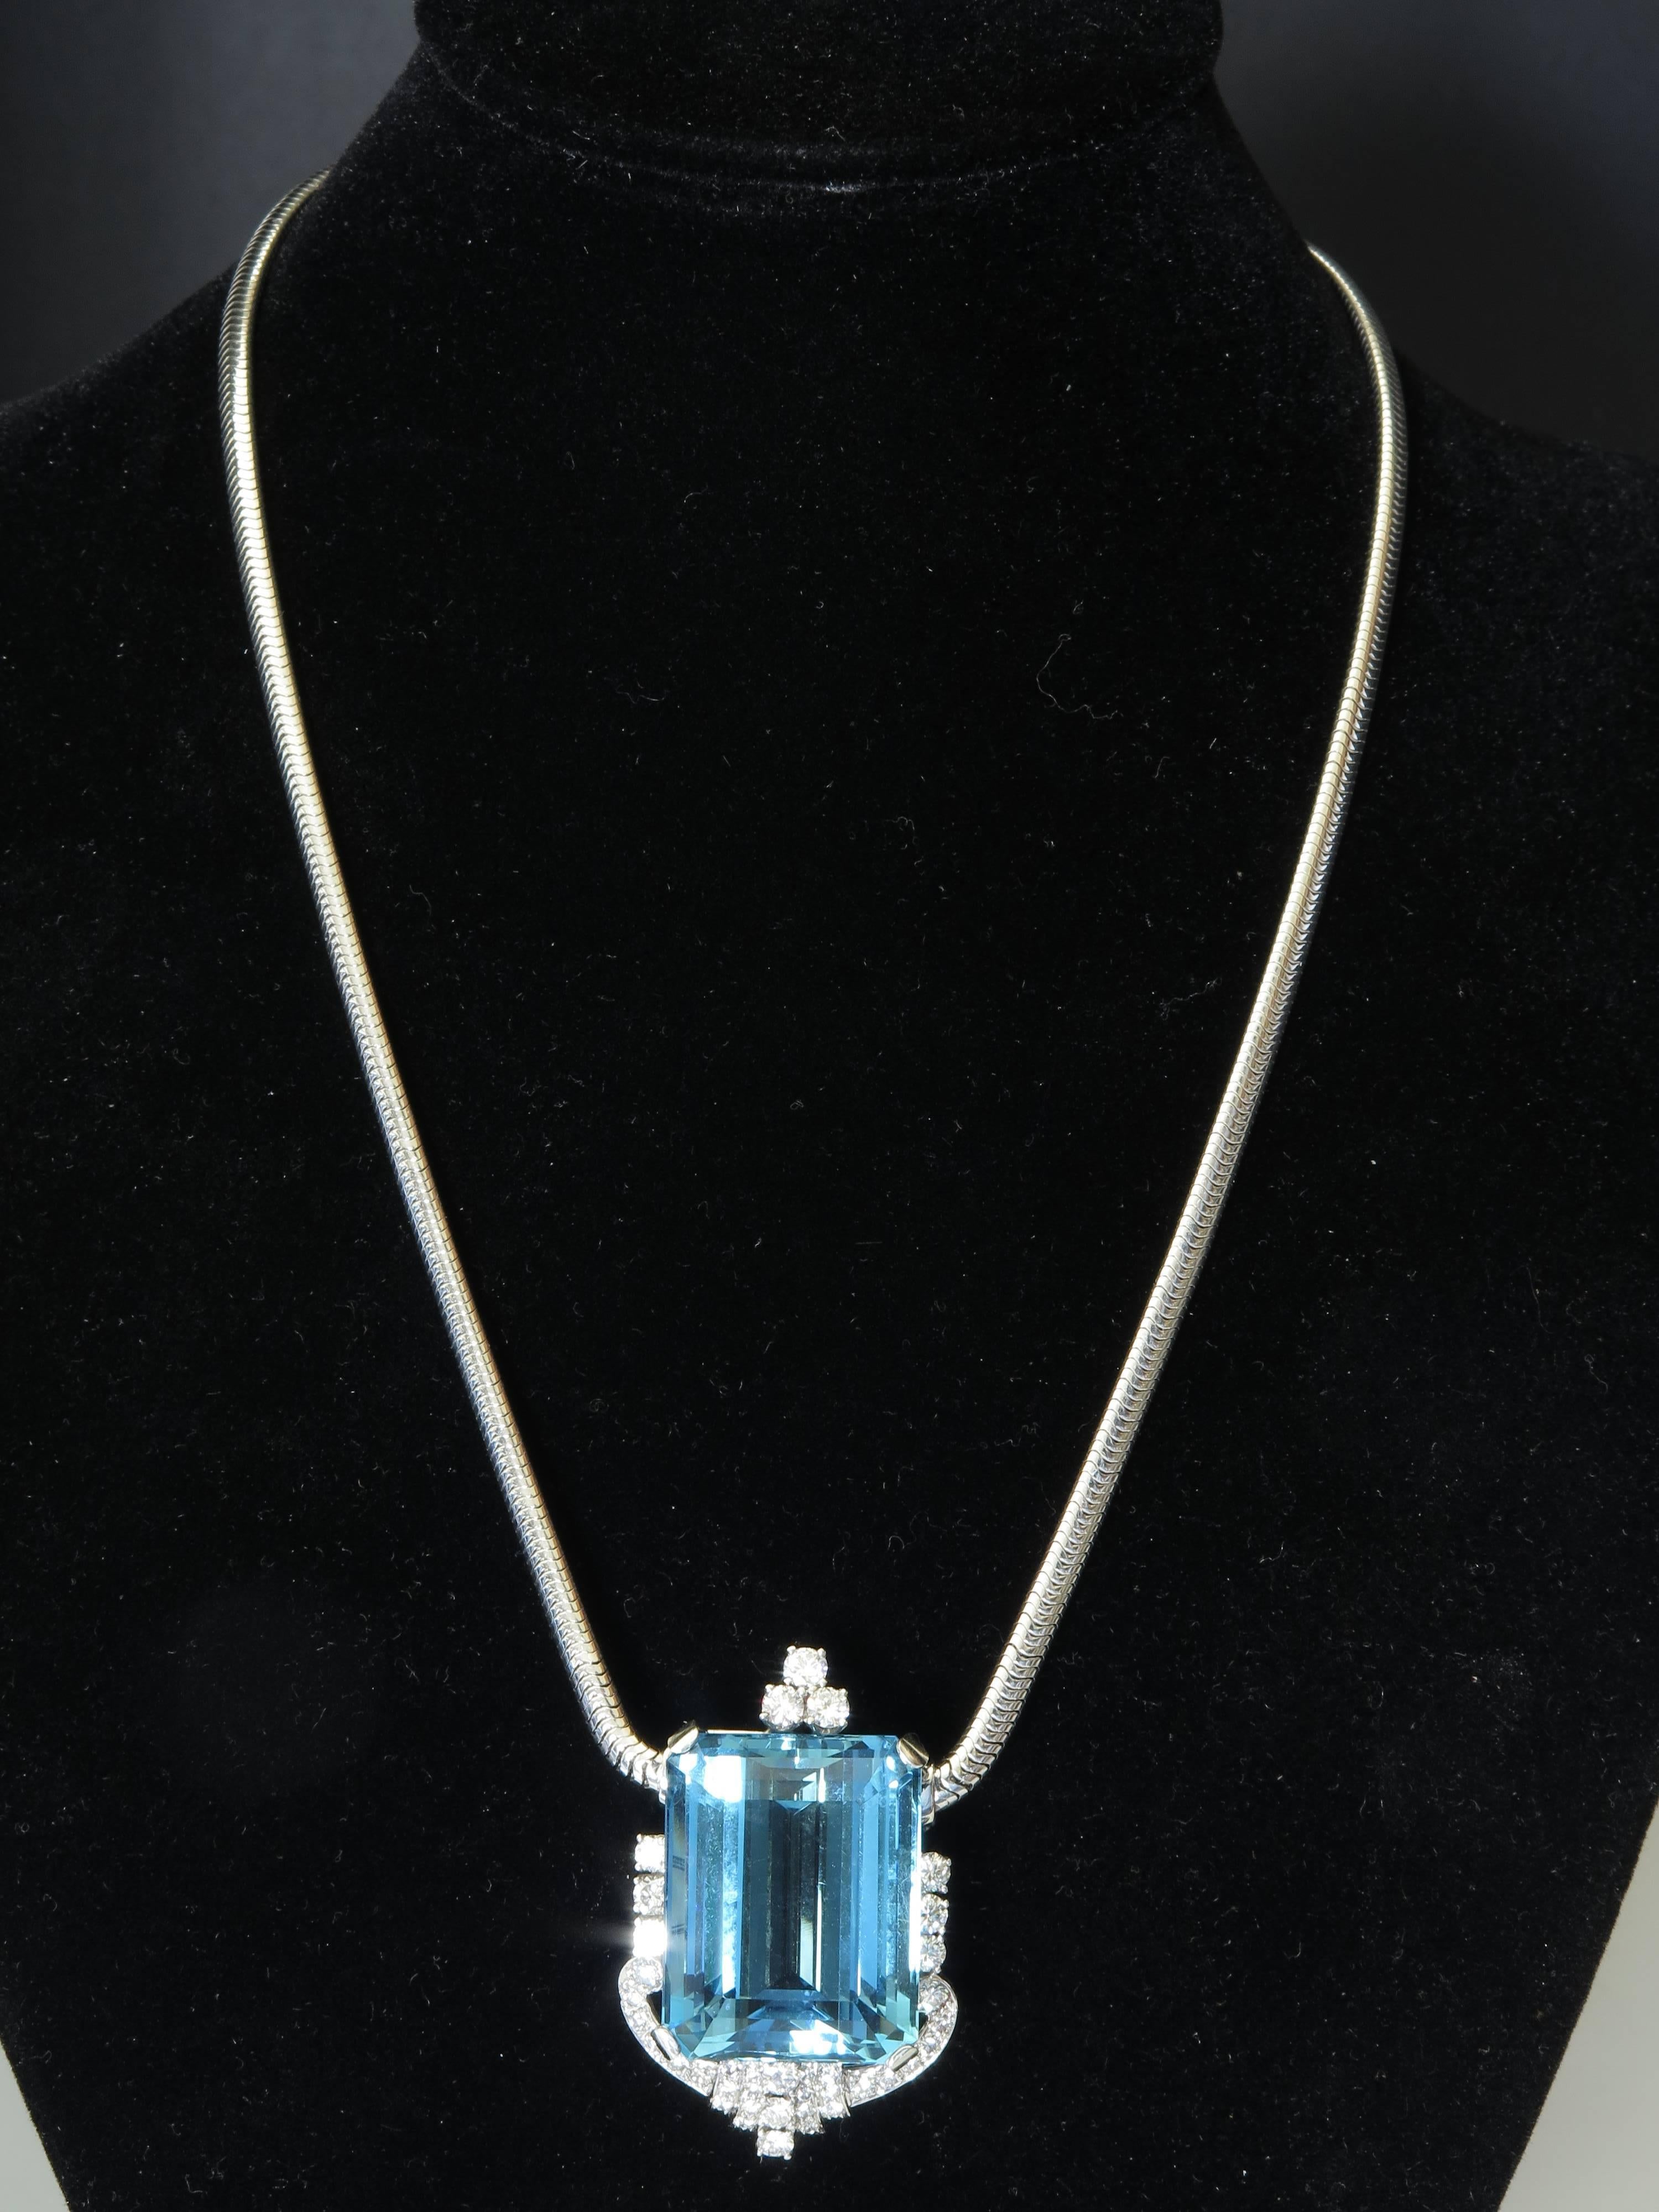 A large and impressive aquamarine pendant mounted in platinum and surrounded by diamonds, all suspended from a 14k while gold serpentine link chain.

The bold rectangular step cut aquamarine of highly saturated deep blue color, weighing